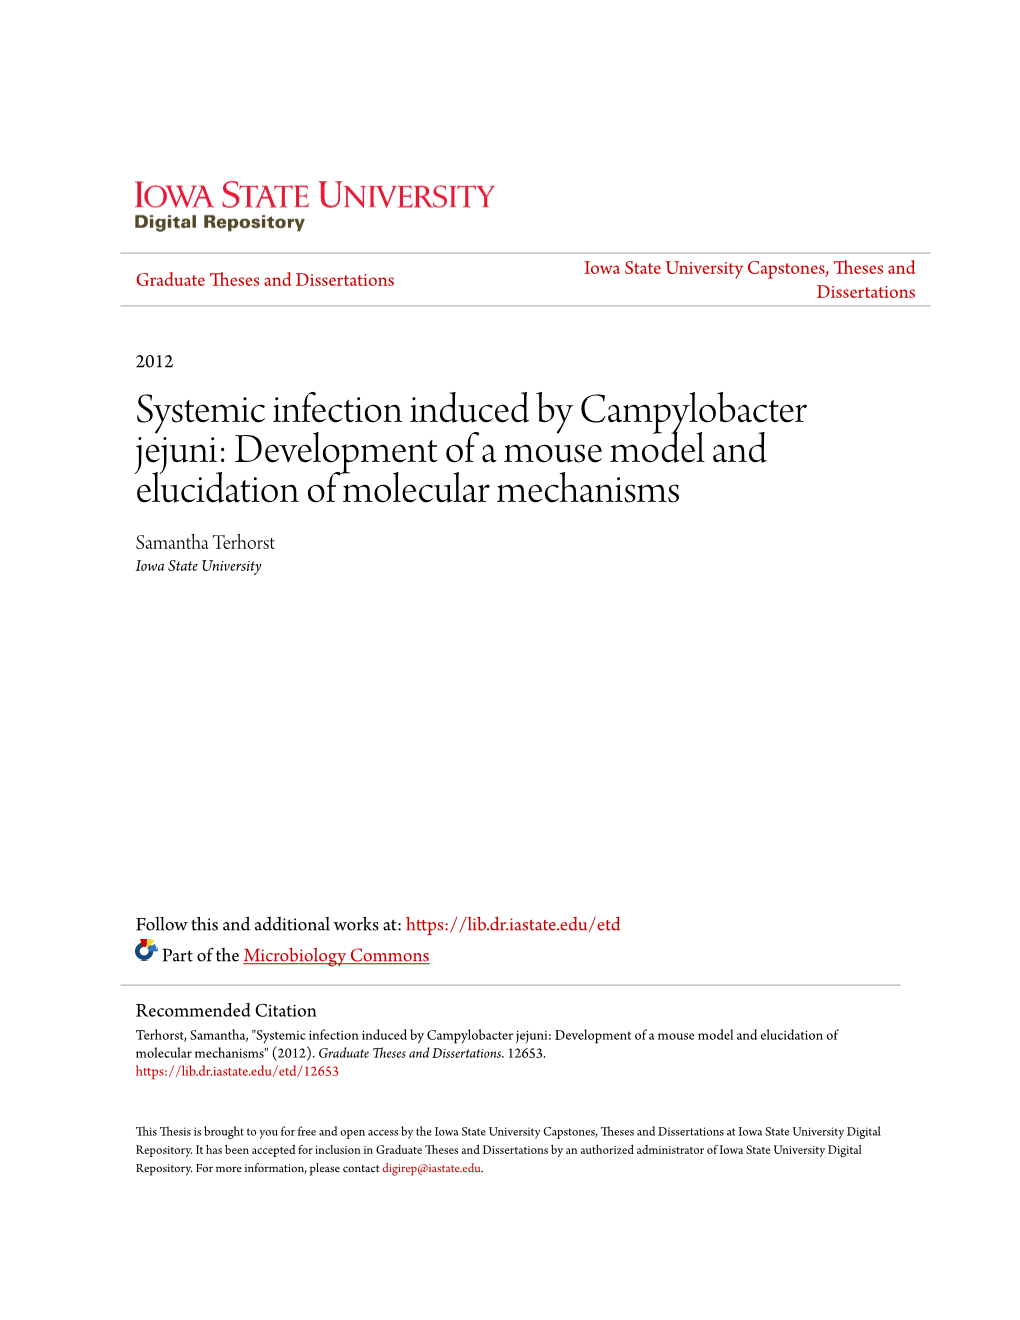 Systemic Infection Induced by Campylobacter Jejuni: Development of a Mouse Model and Elucidation of Molecular Mechanisms Samantha Terhorst Iowa State University